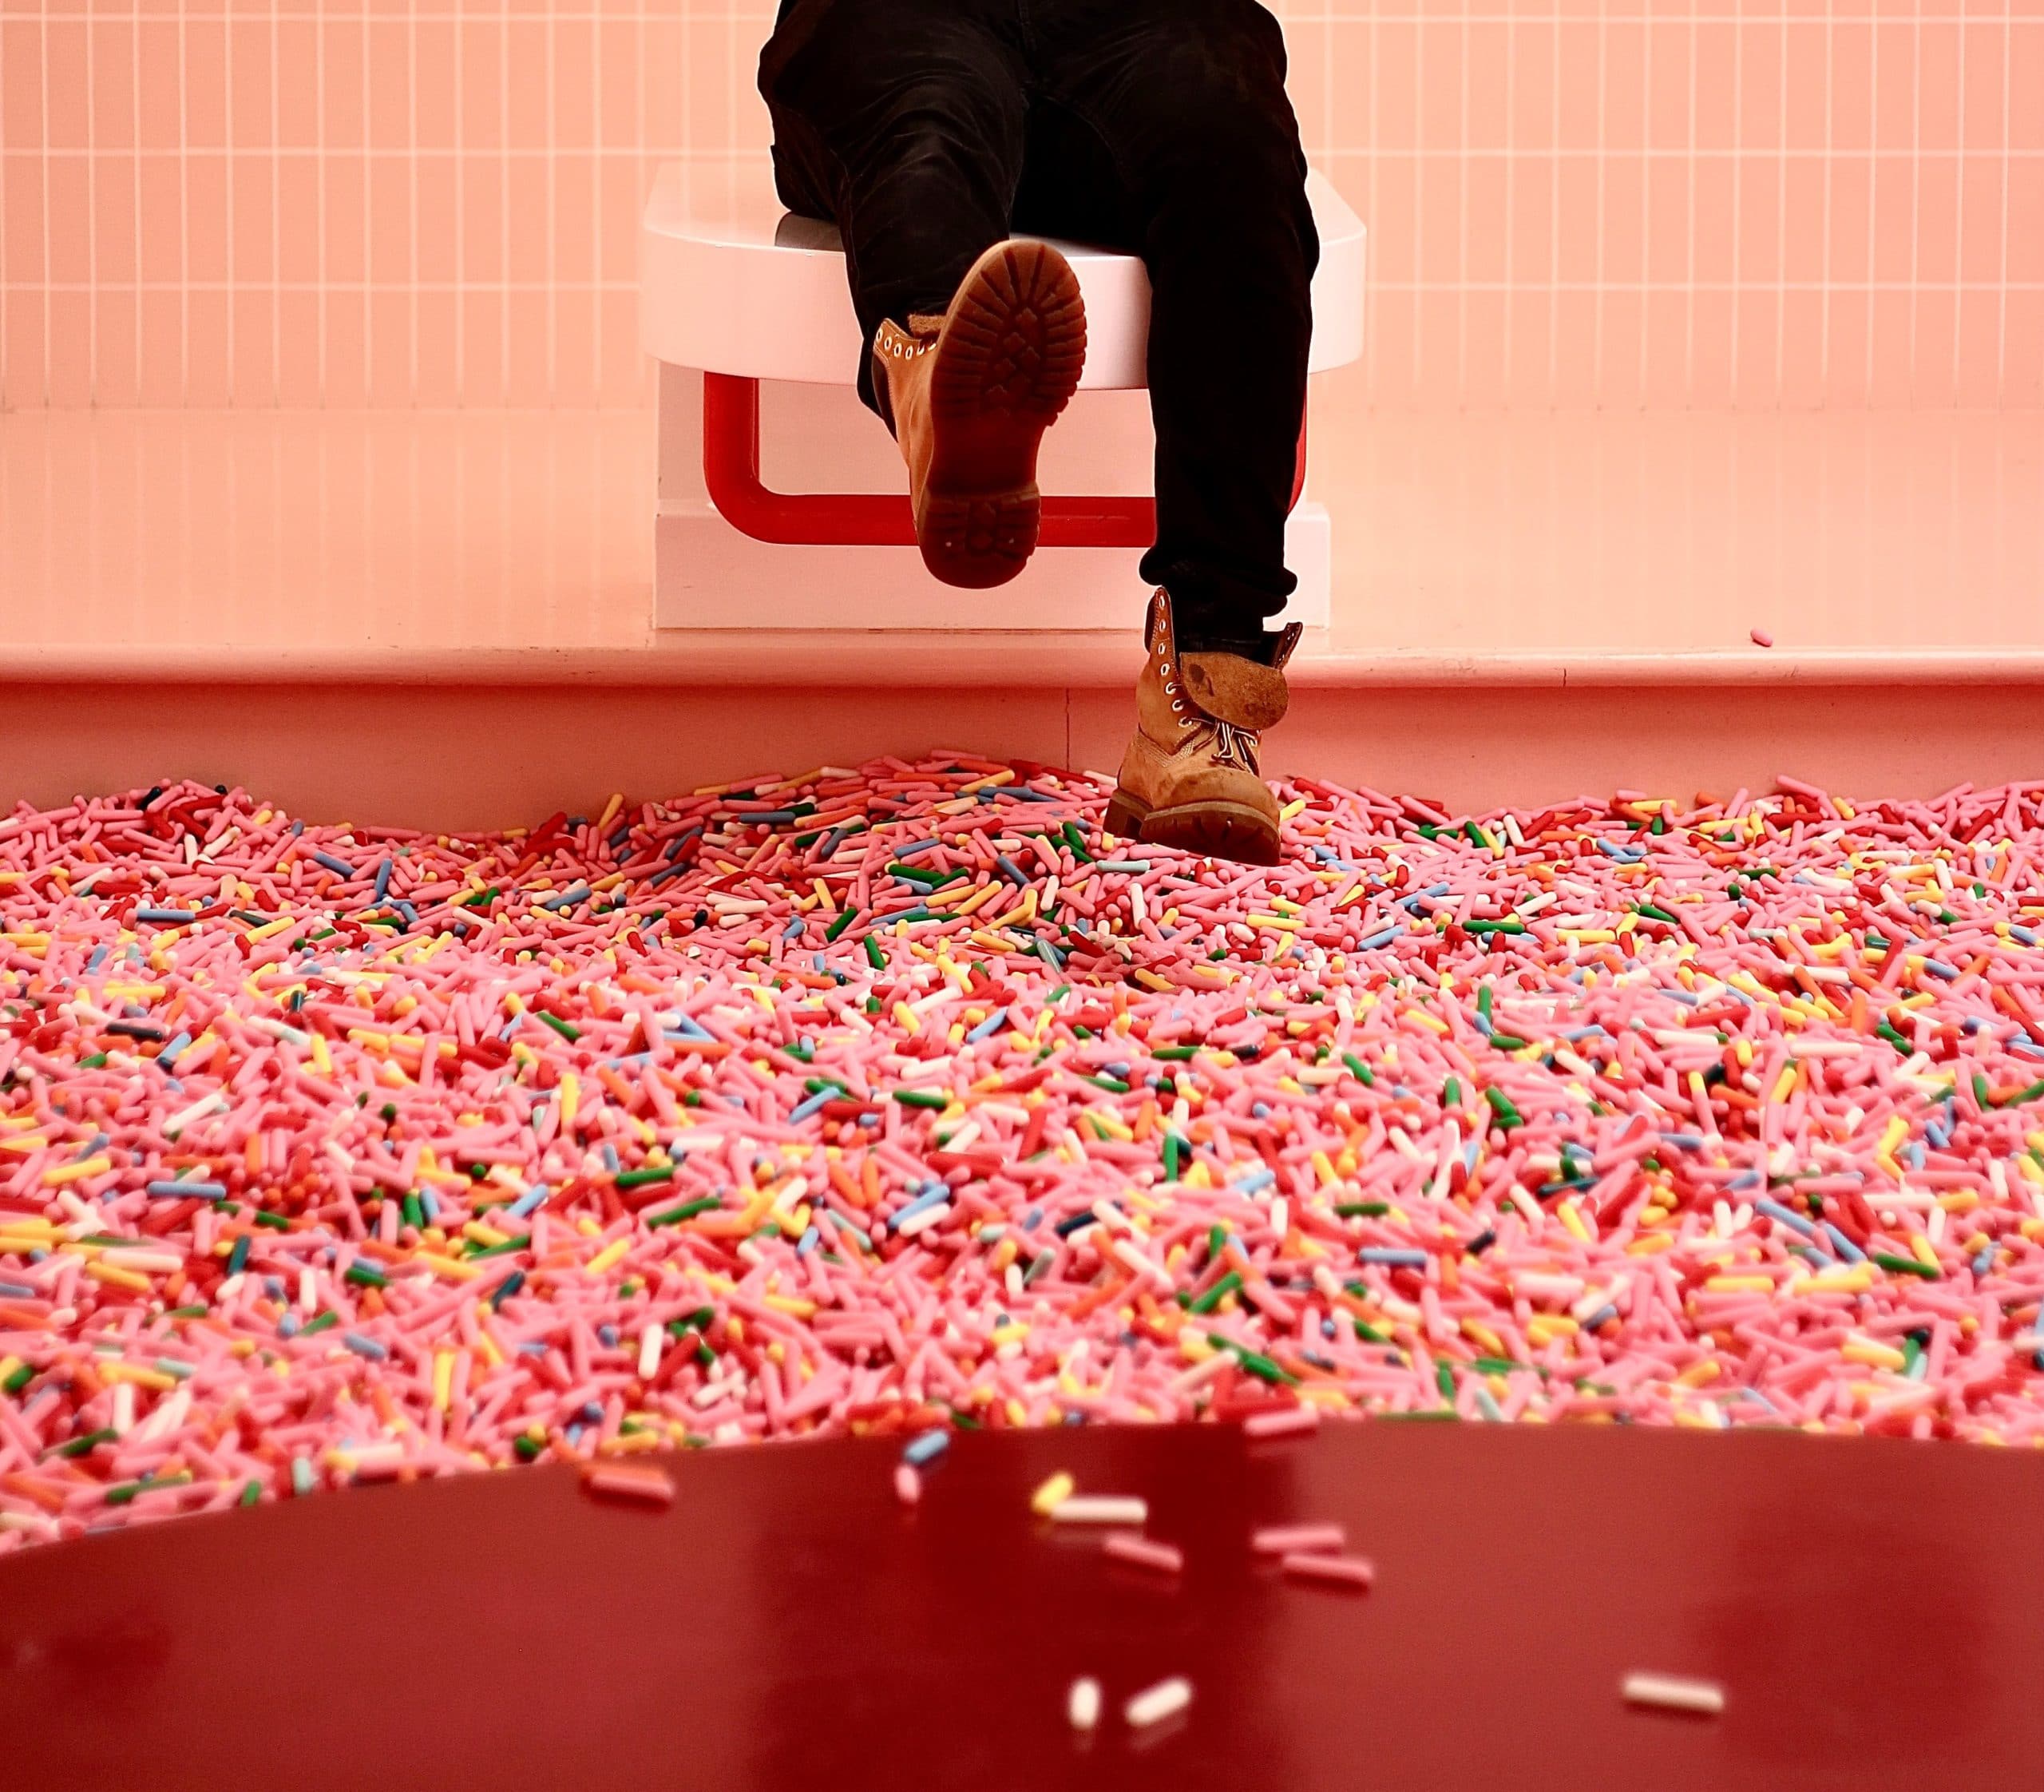 The Museum of Ice Cream in New York City: An Instagram Dream Come True